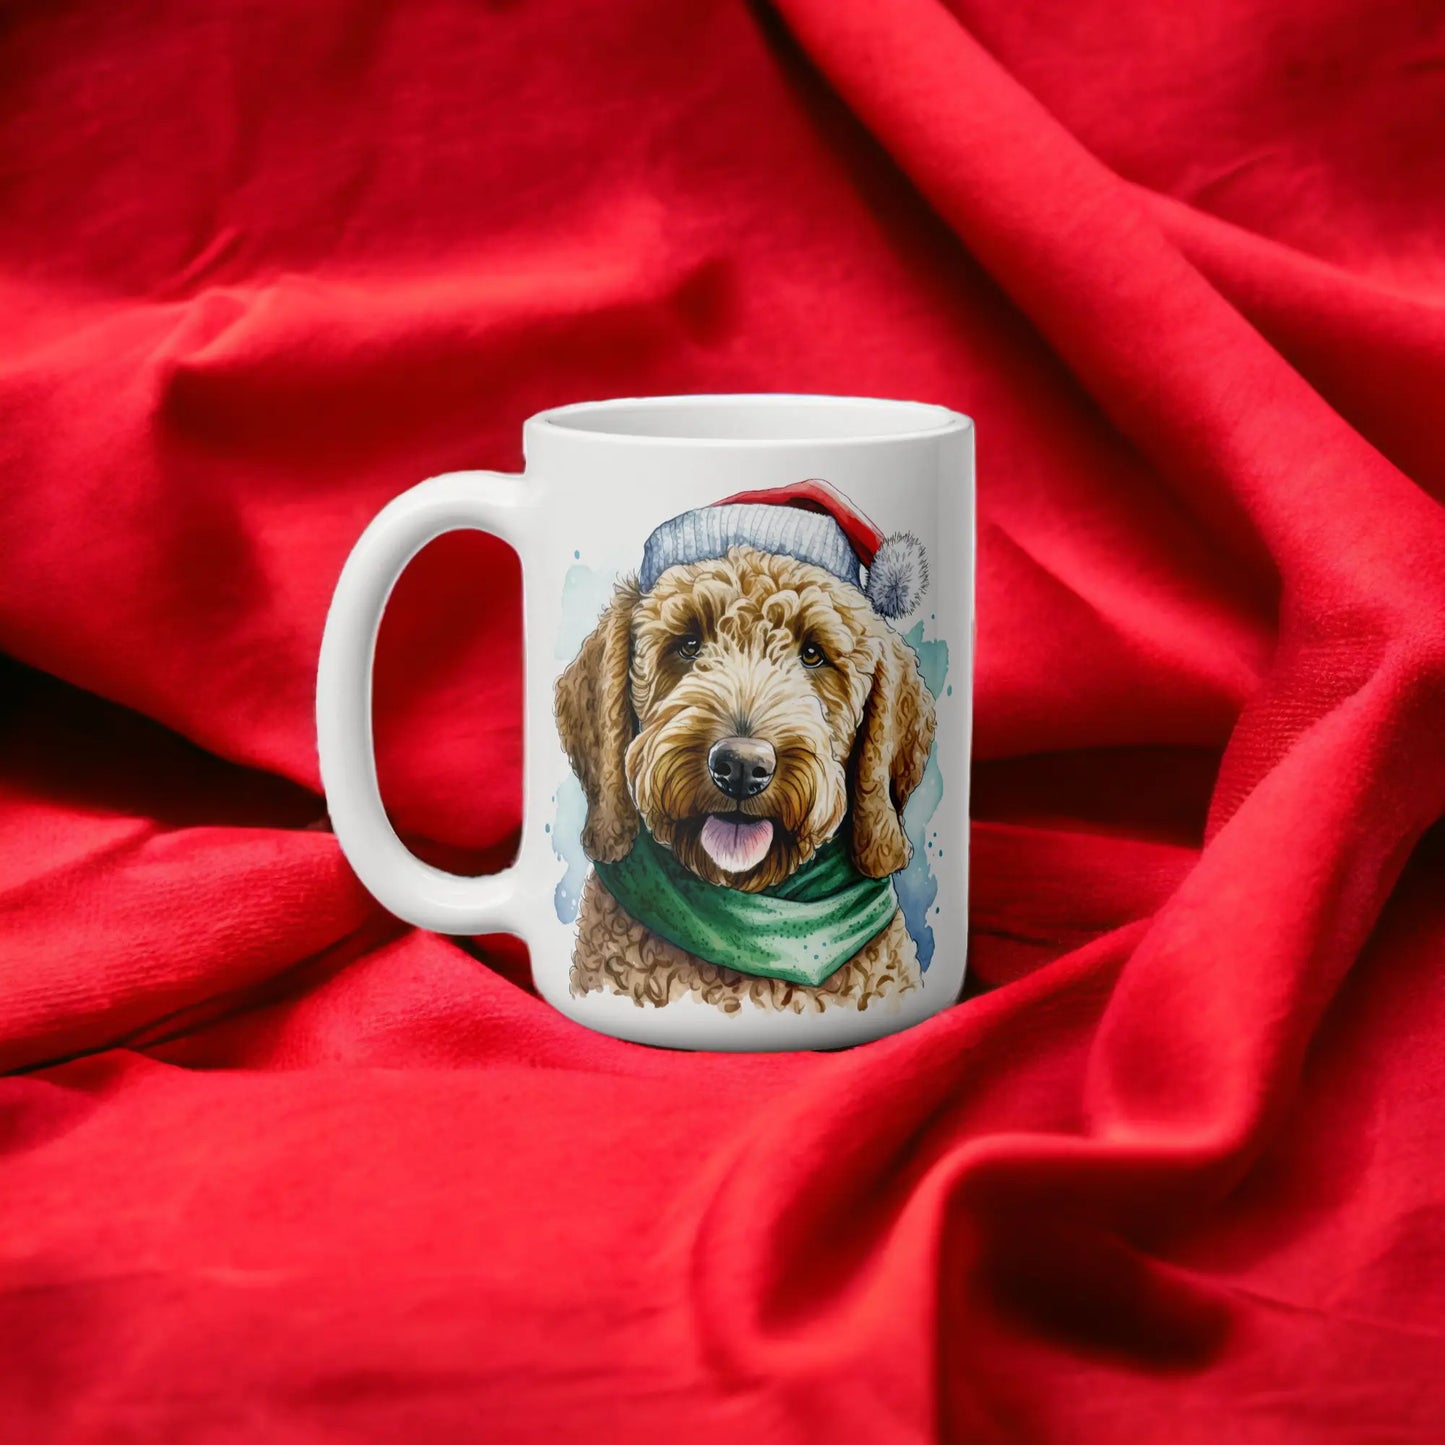  Christmas Golden Doodle Mug - Perfect Custom Gift by Free Spirit Accessories sold by Free Spirit Accessories